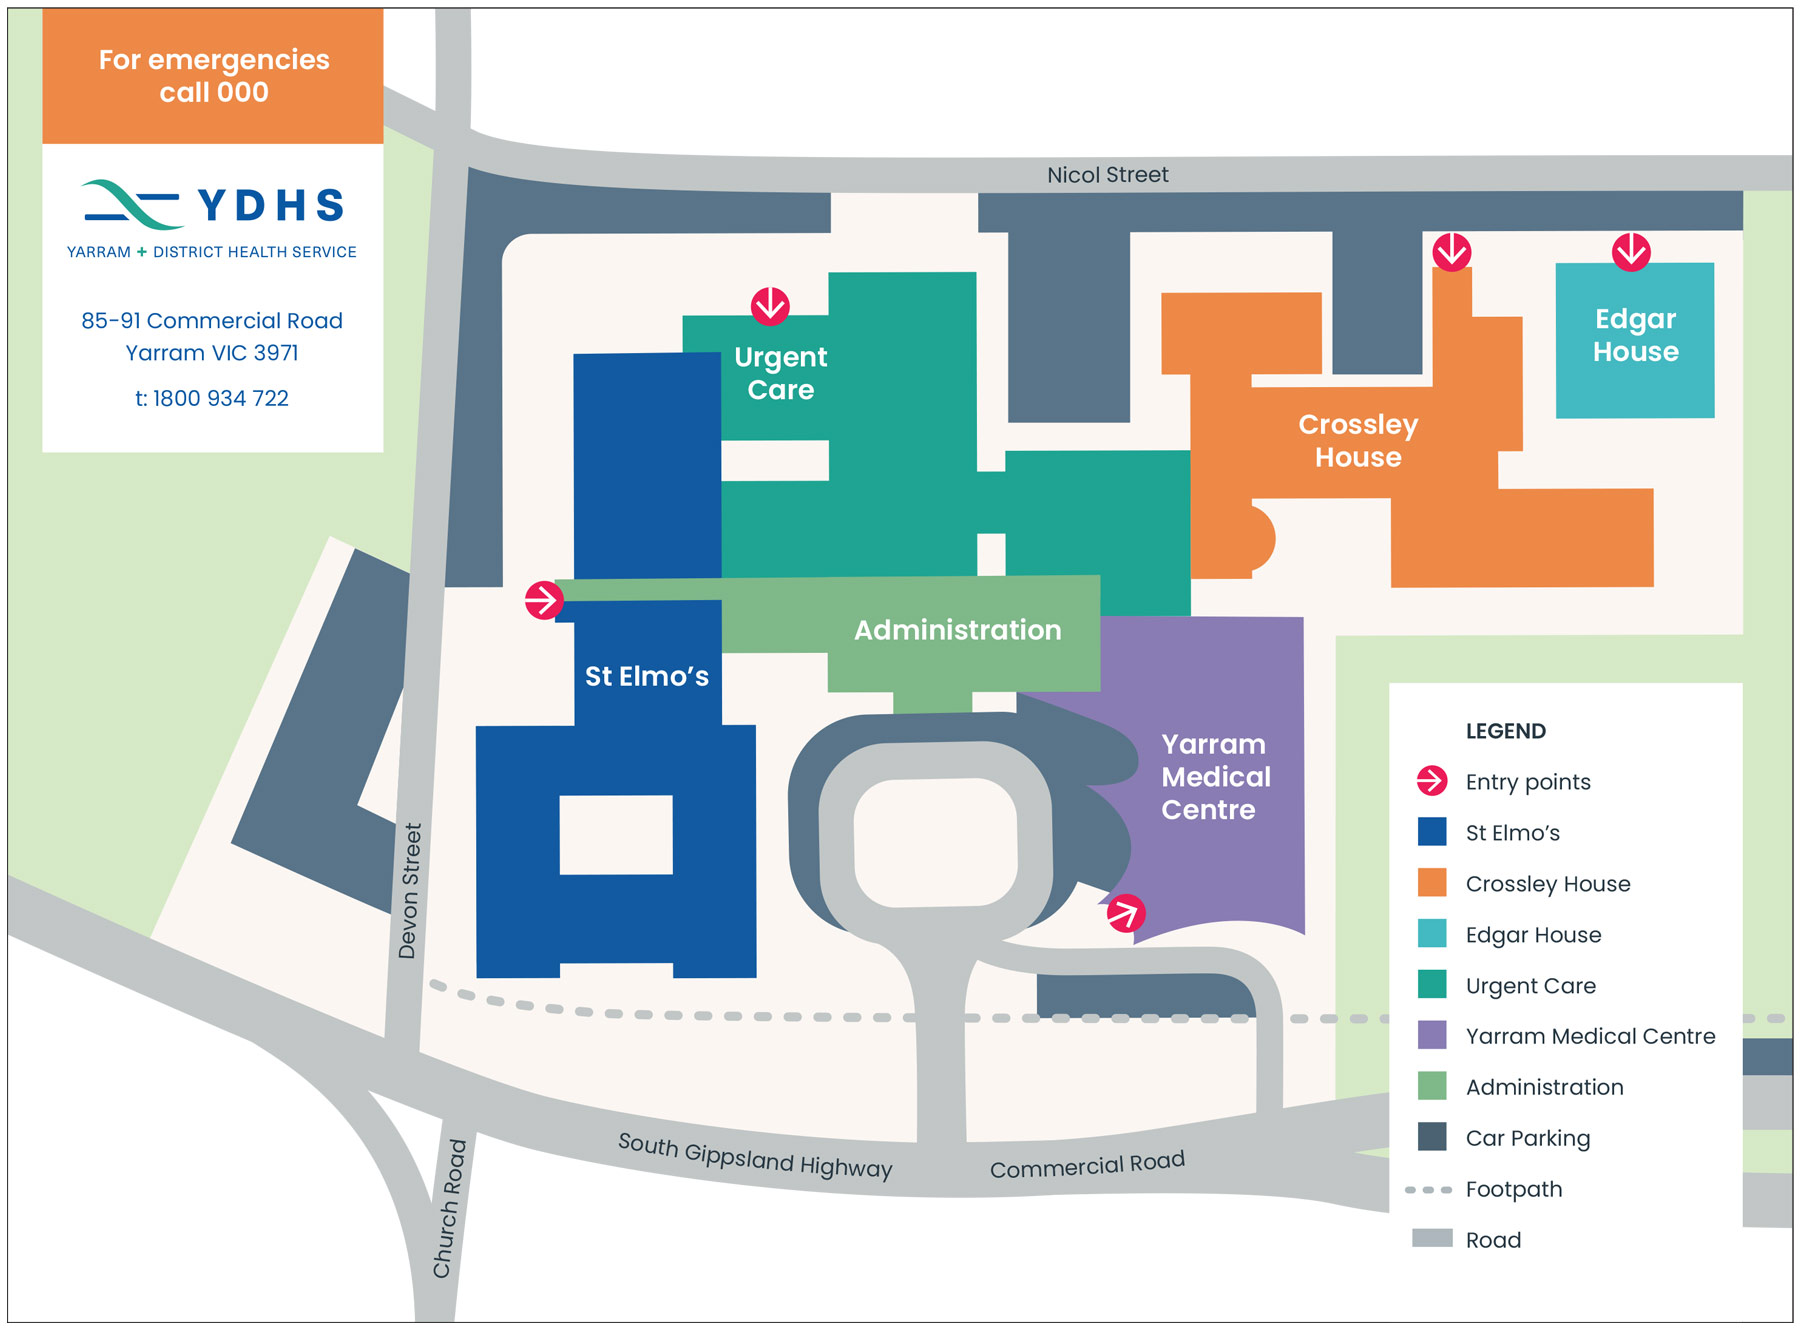 Map of the YDHS site showing different service areas and parking in different colours.